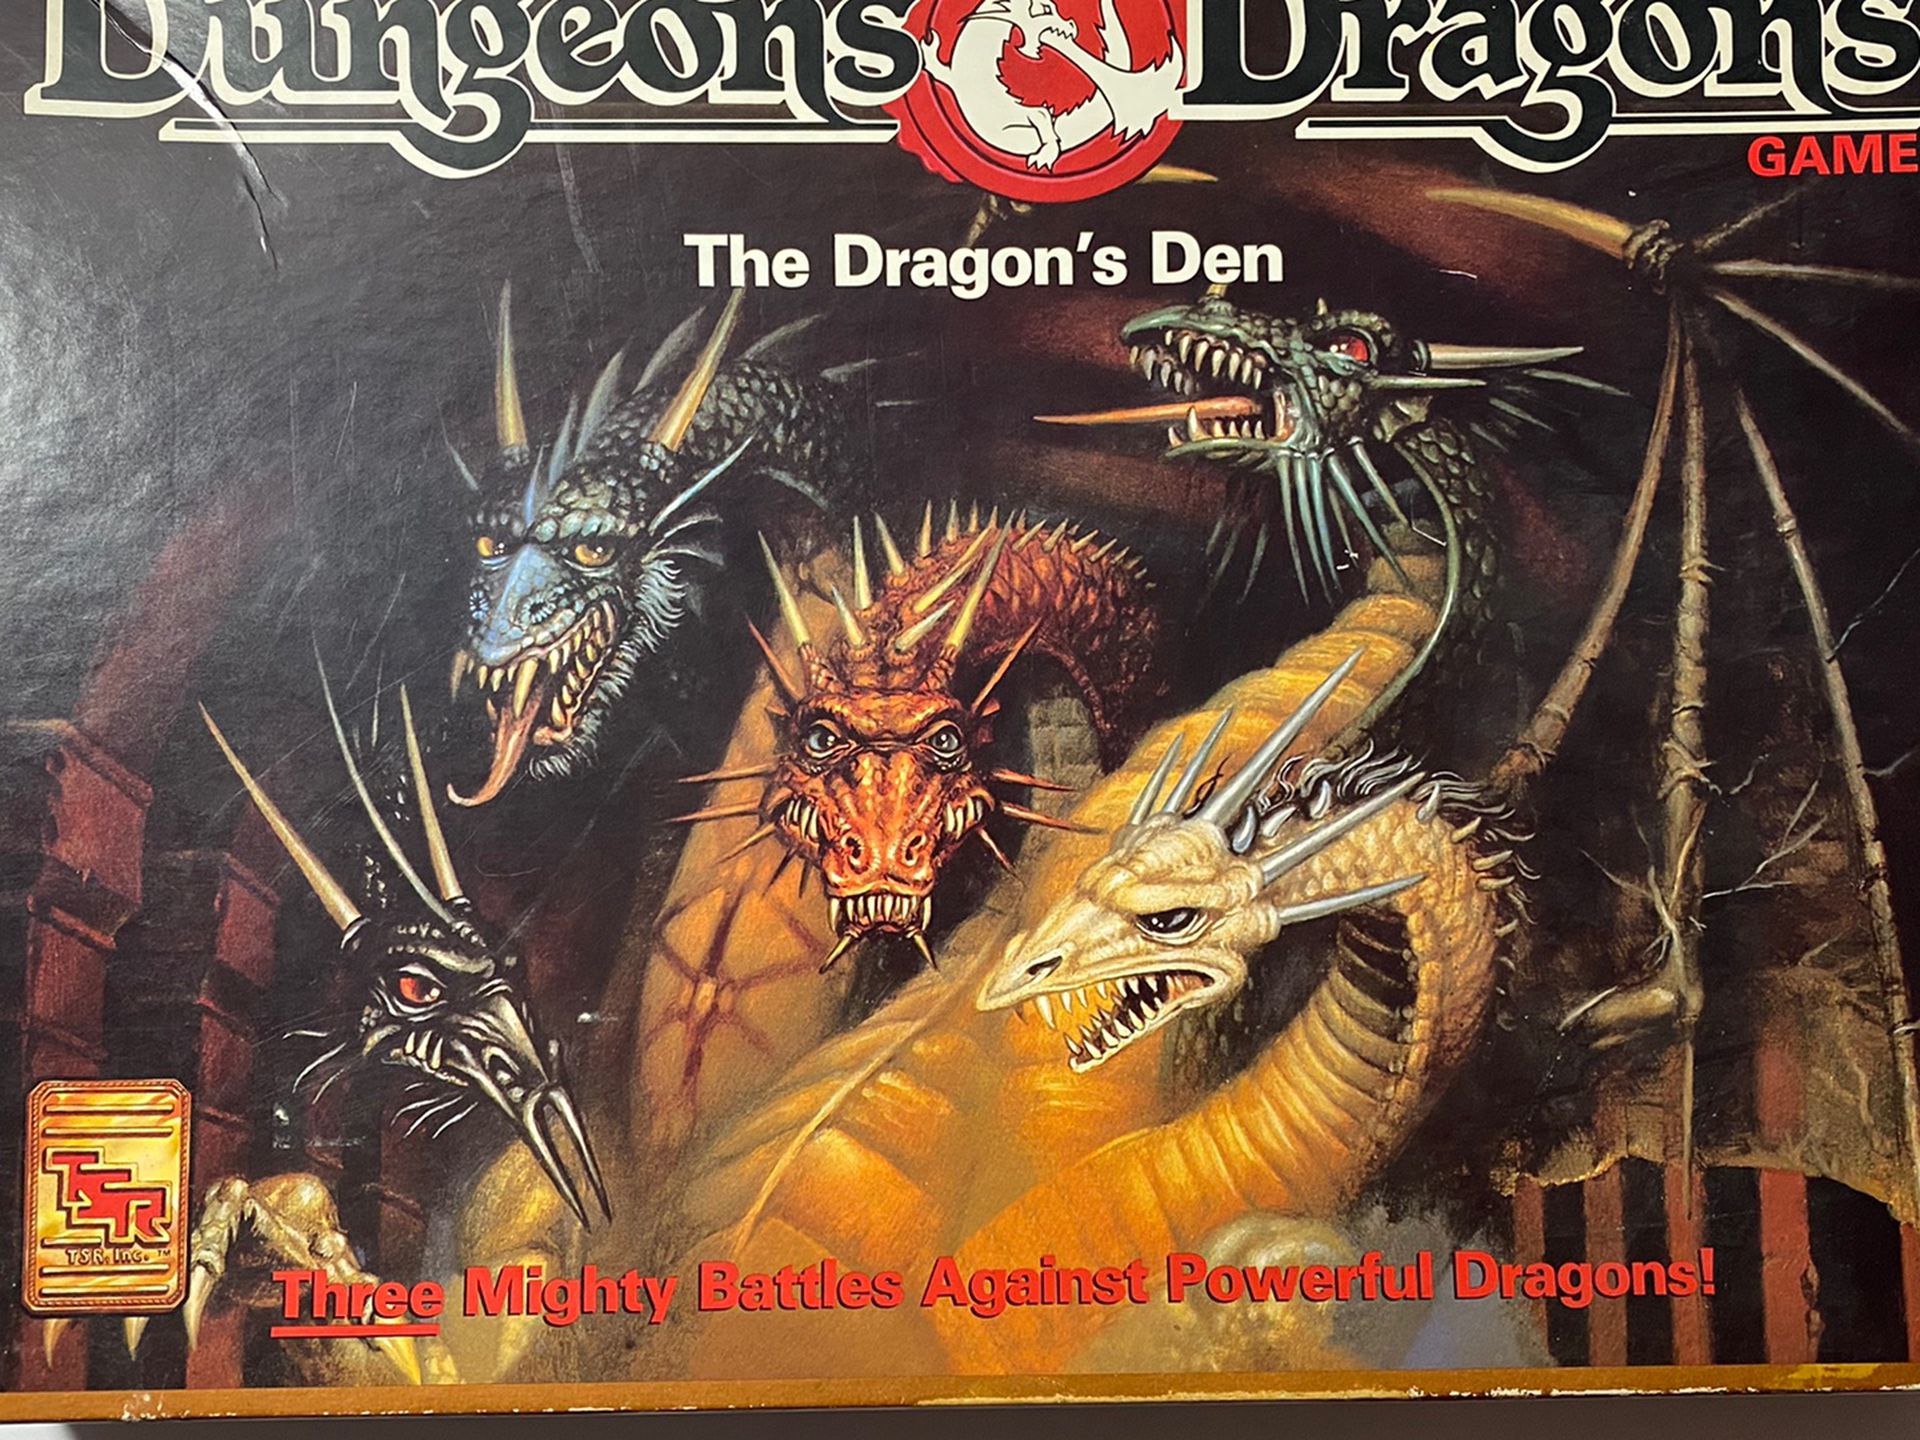 THE DRAGONS DEN: DUNGEONS AND DRAGONS BOARD GAME